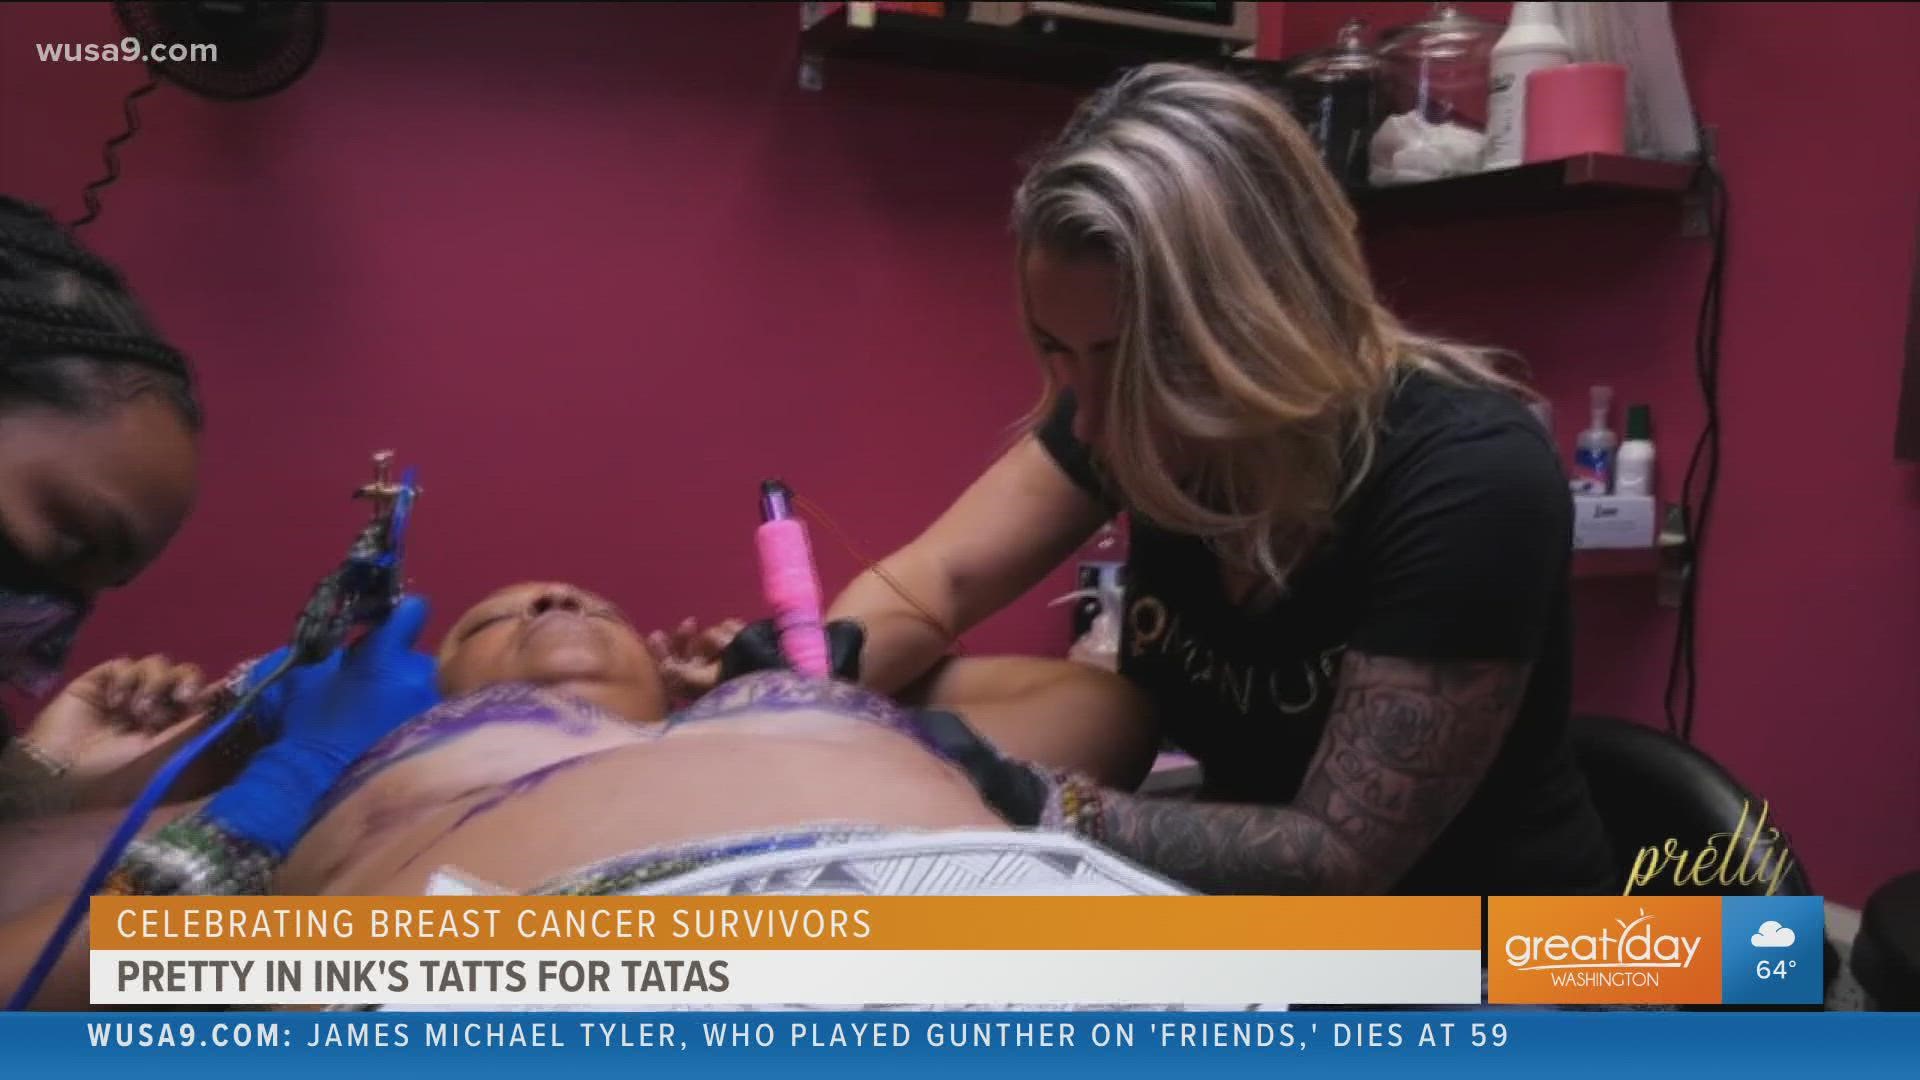 Through ink and art, Pretty in Ink owner, Jackie Matikas hopes to provide breast cancer survivors with a third choice after their battle beyond reconstruction.